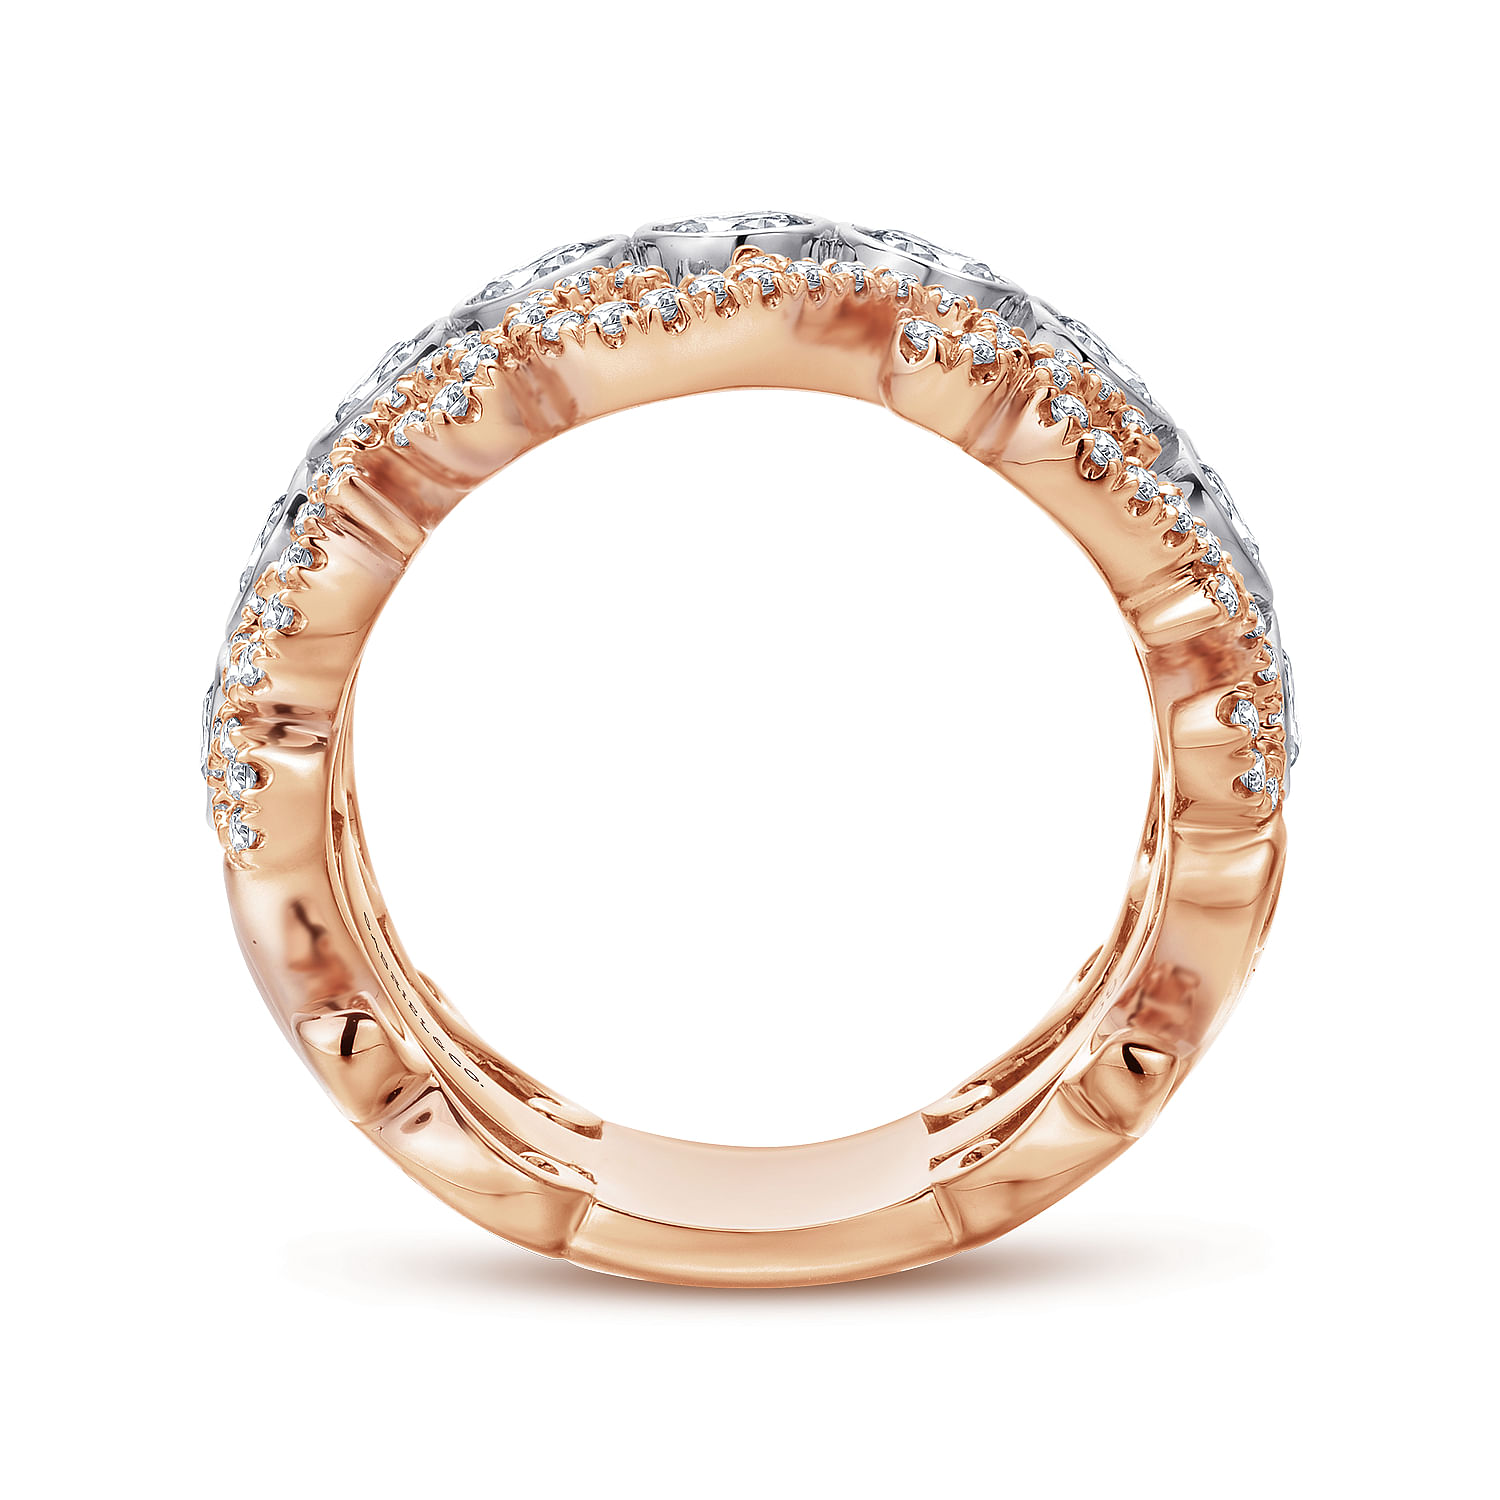 Wide 14K White and Rose Gold Fancy Diamond Anniversary Band